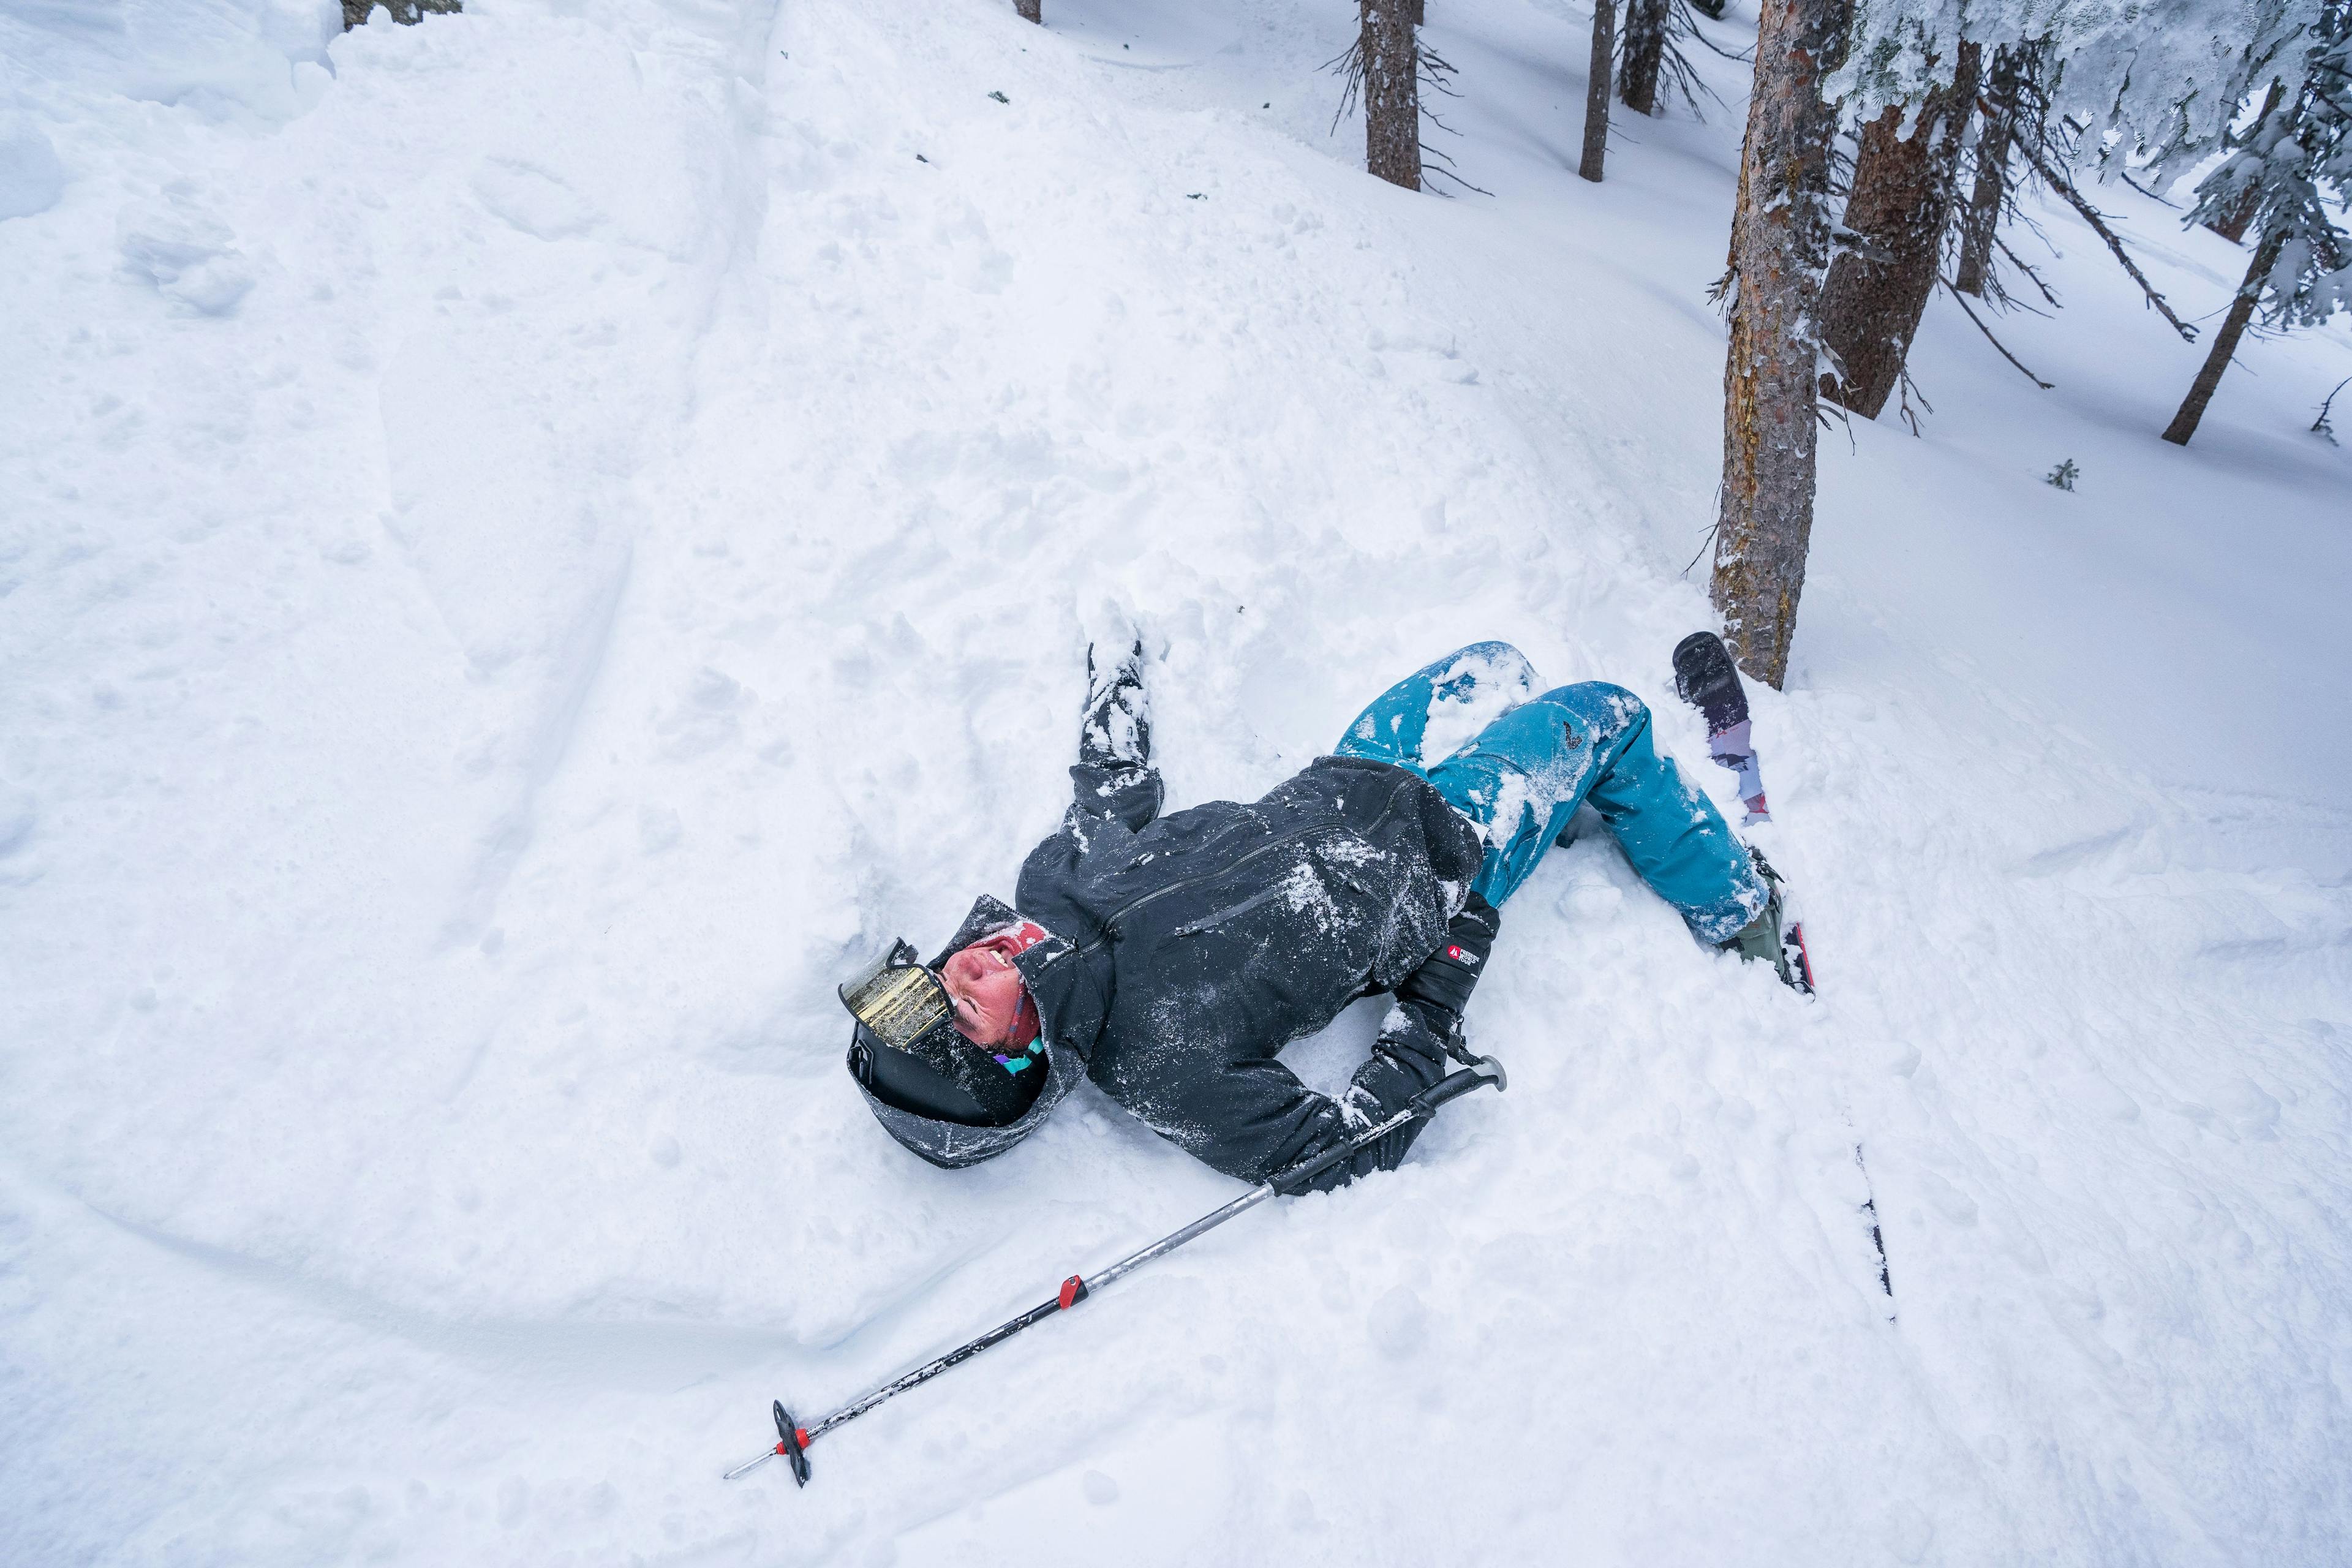 Skier laying in the snow after a crash landing